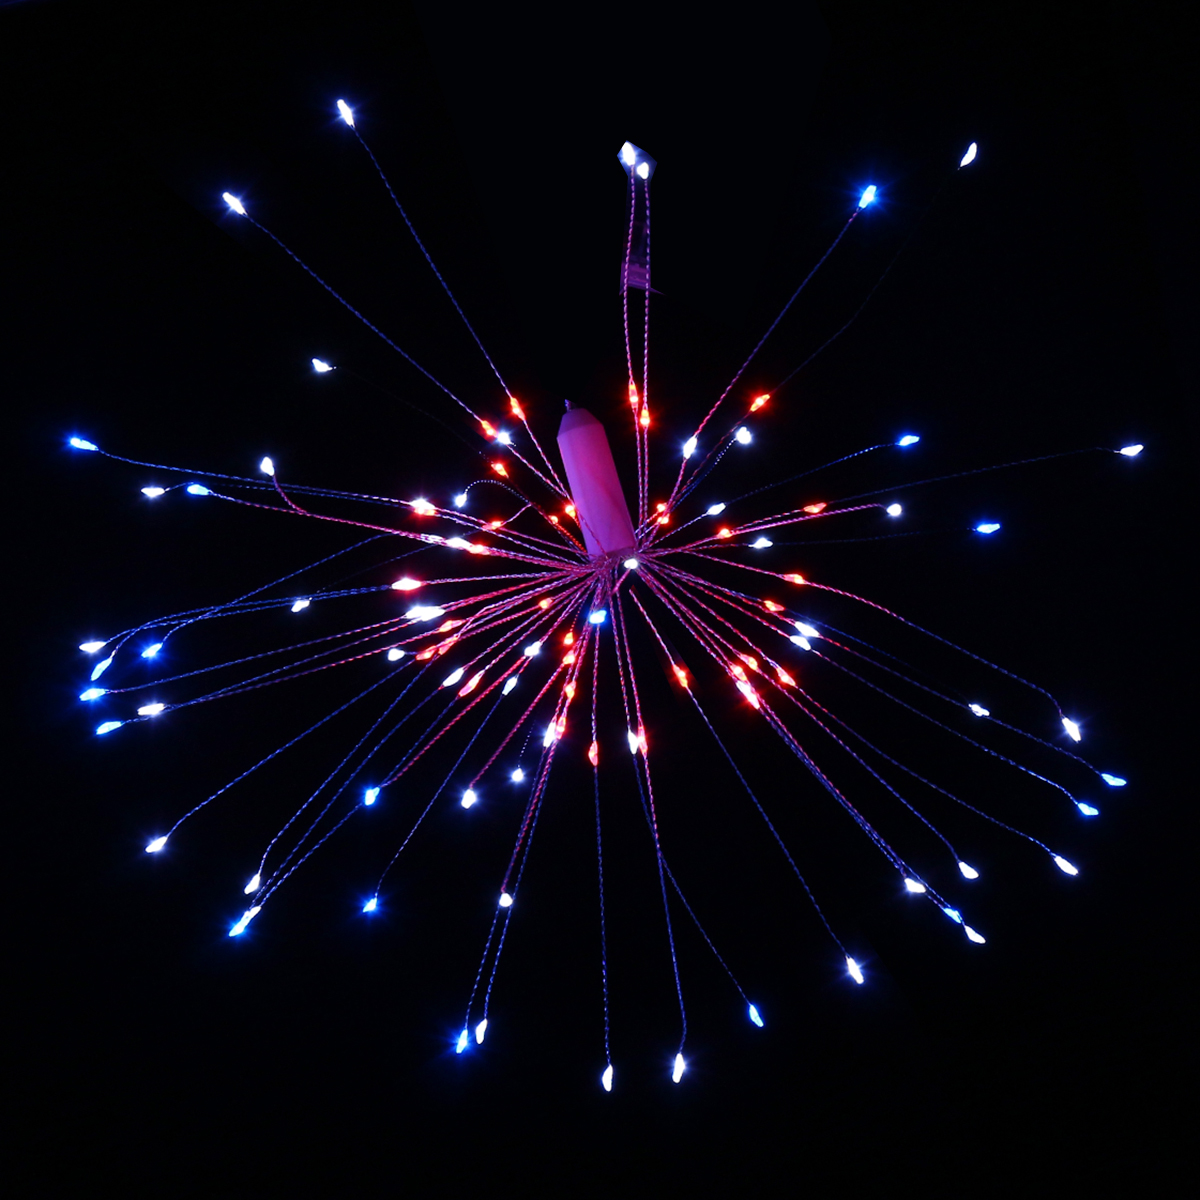 Dual-Powered-USB-Battery-150-LED-Starburst-String-Fairy-Light-Sliver-Wire-Wedding-Party-Home-Decor-1412924-6